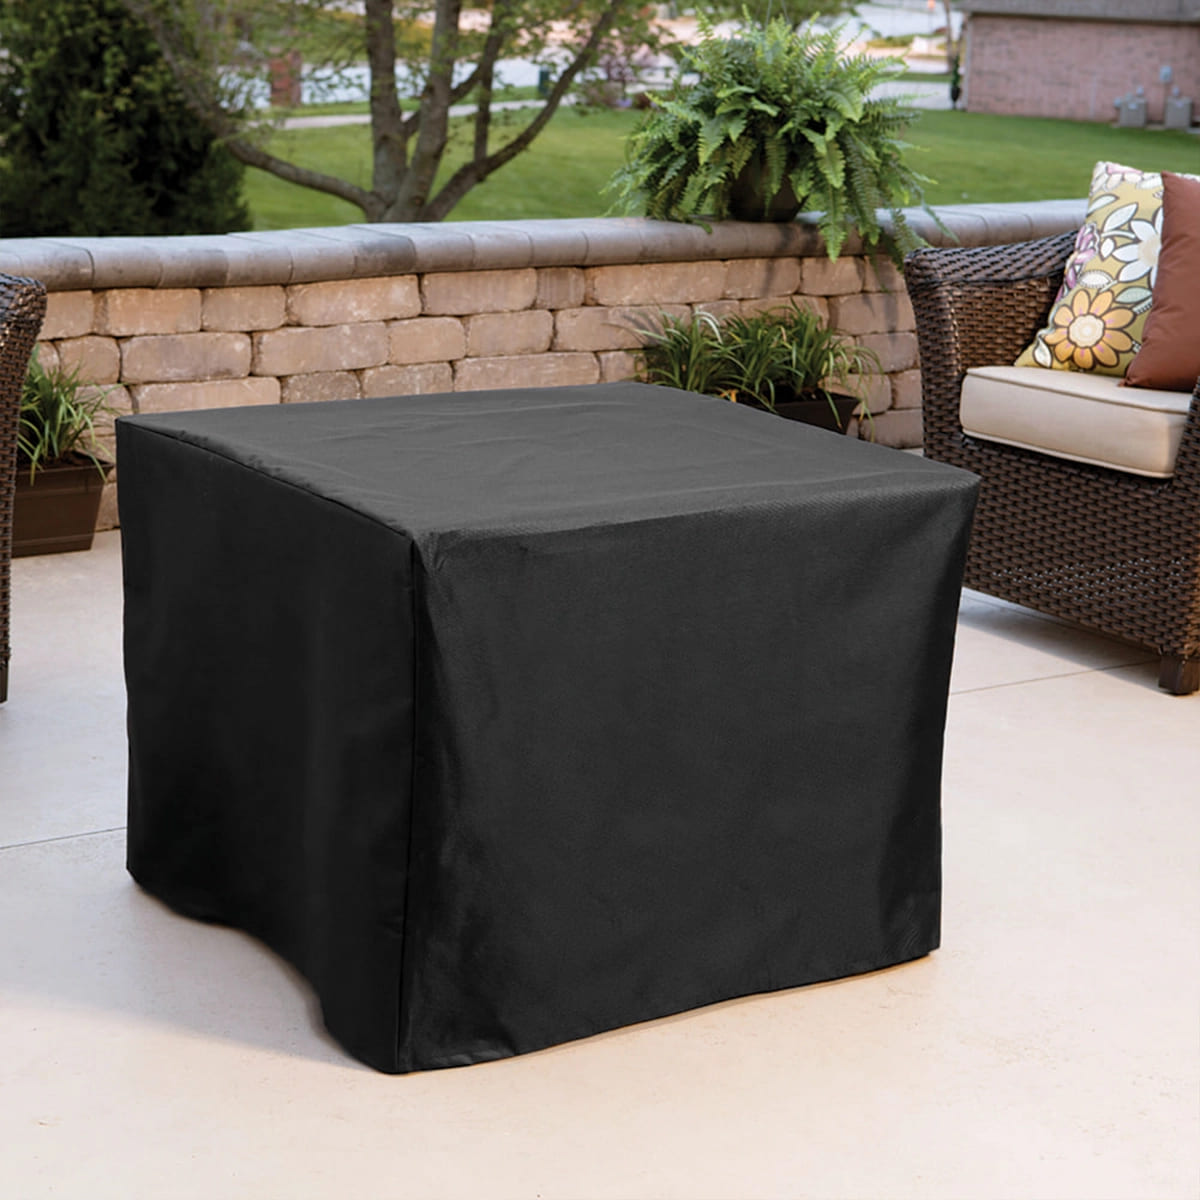 Endless Summer 30 Inch Square 30,000 BTU LP Gas Outdoor Fire Pit from Target